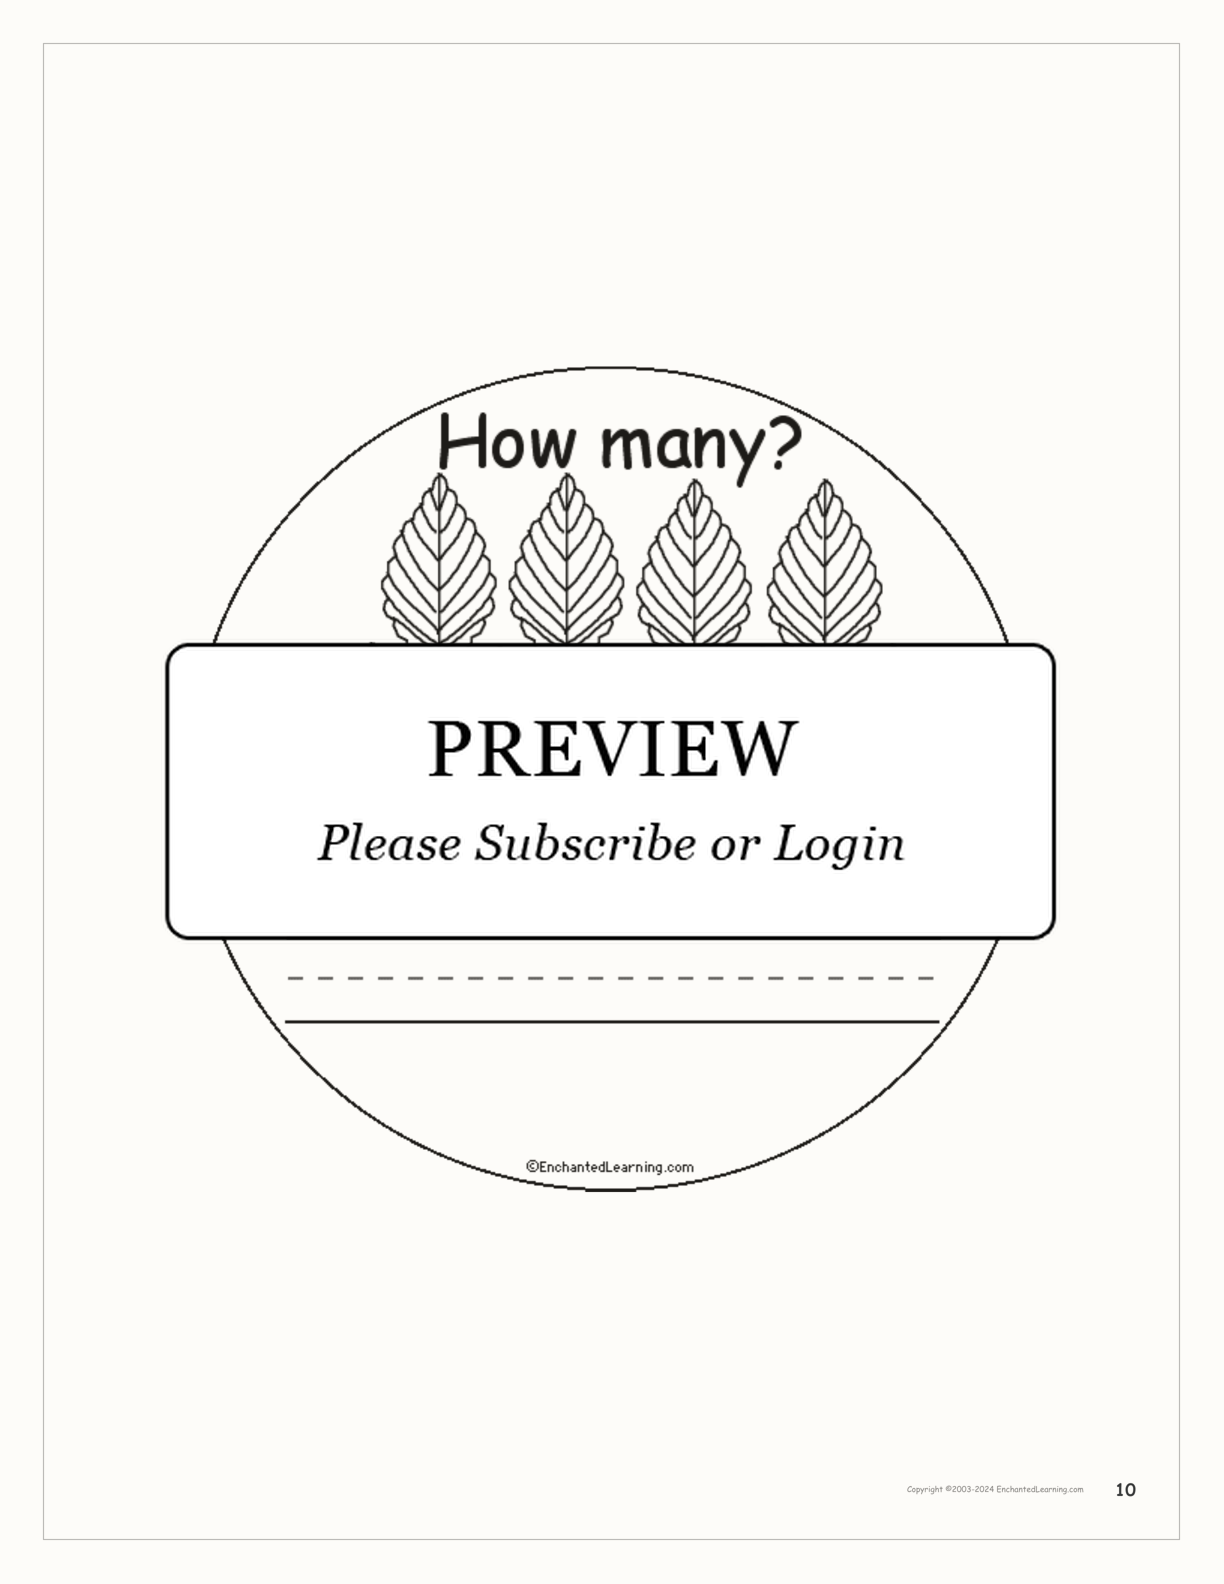 How Many Leaves? interactive printout page 10